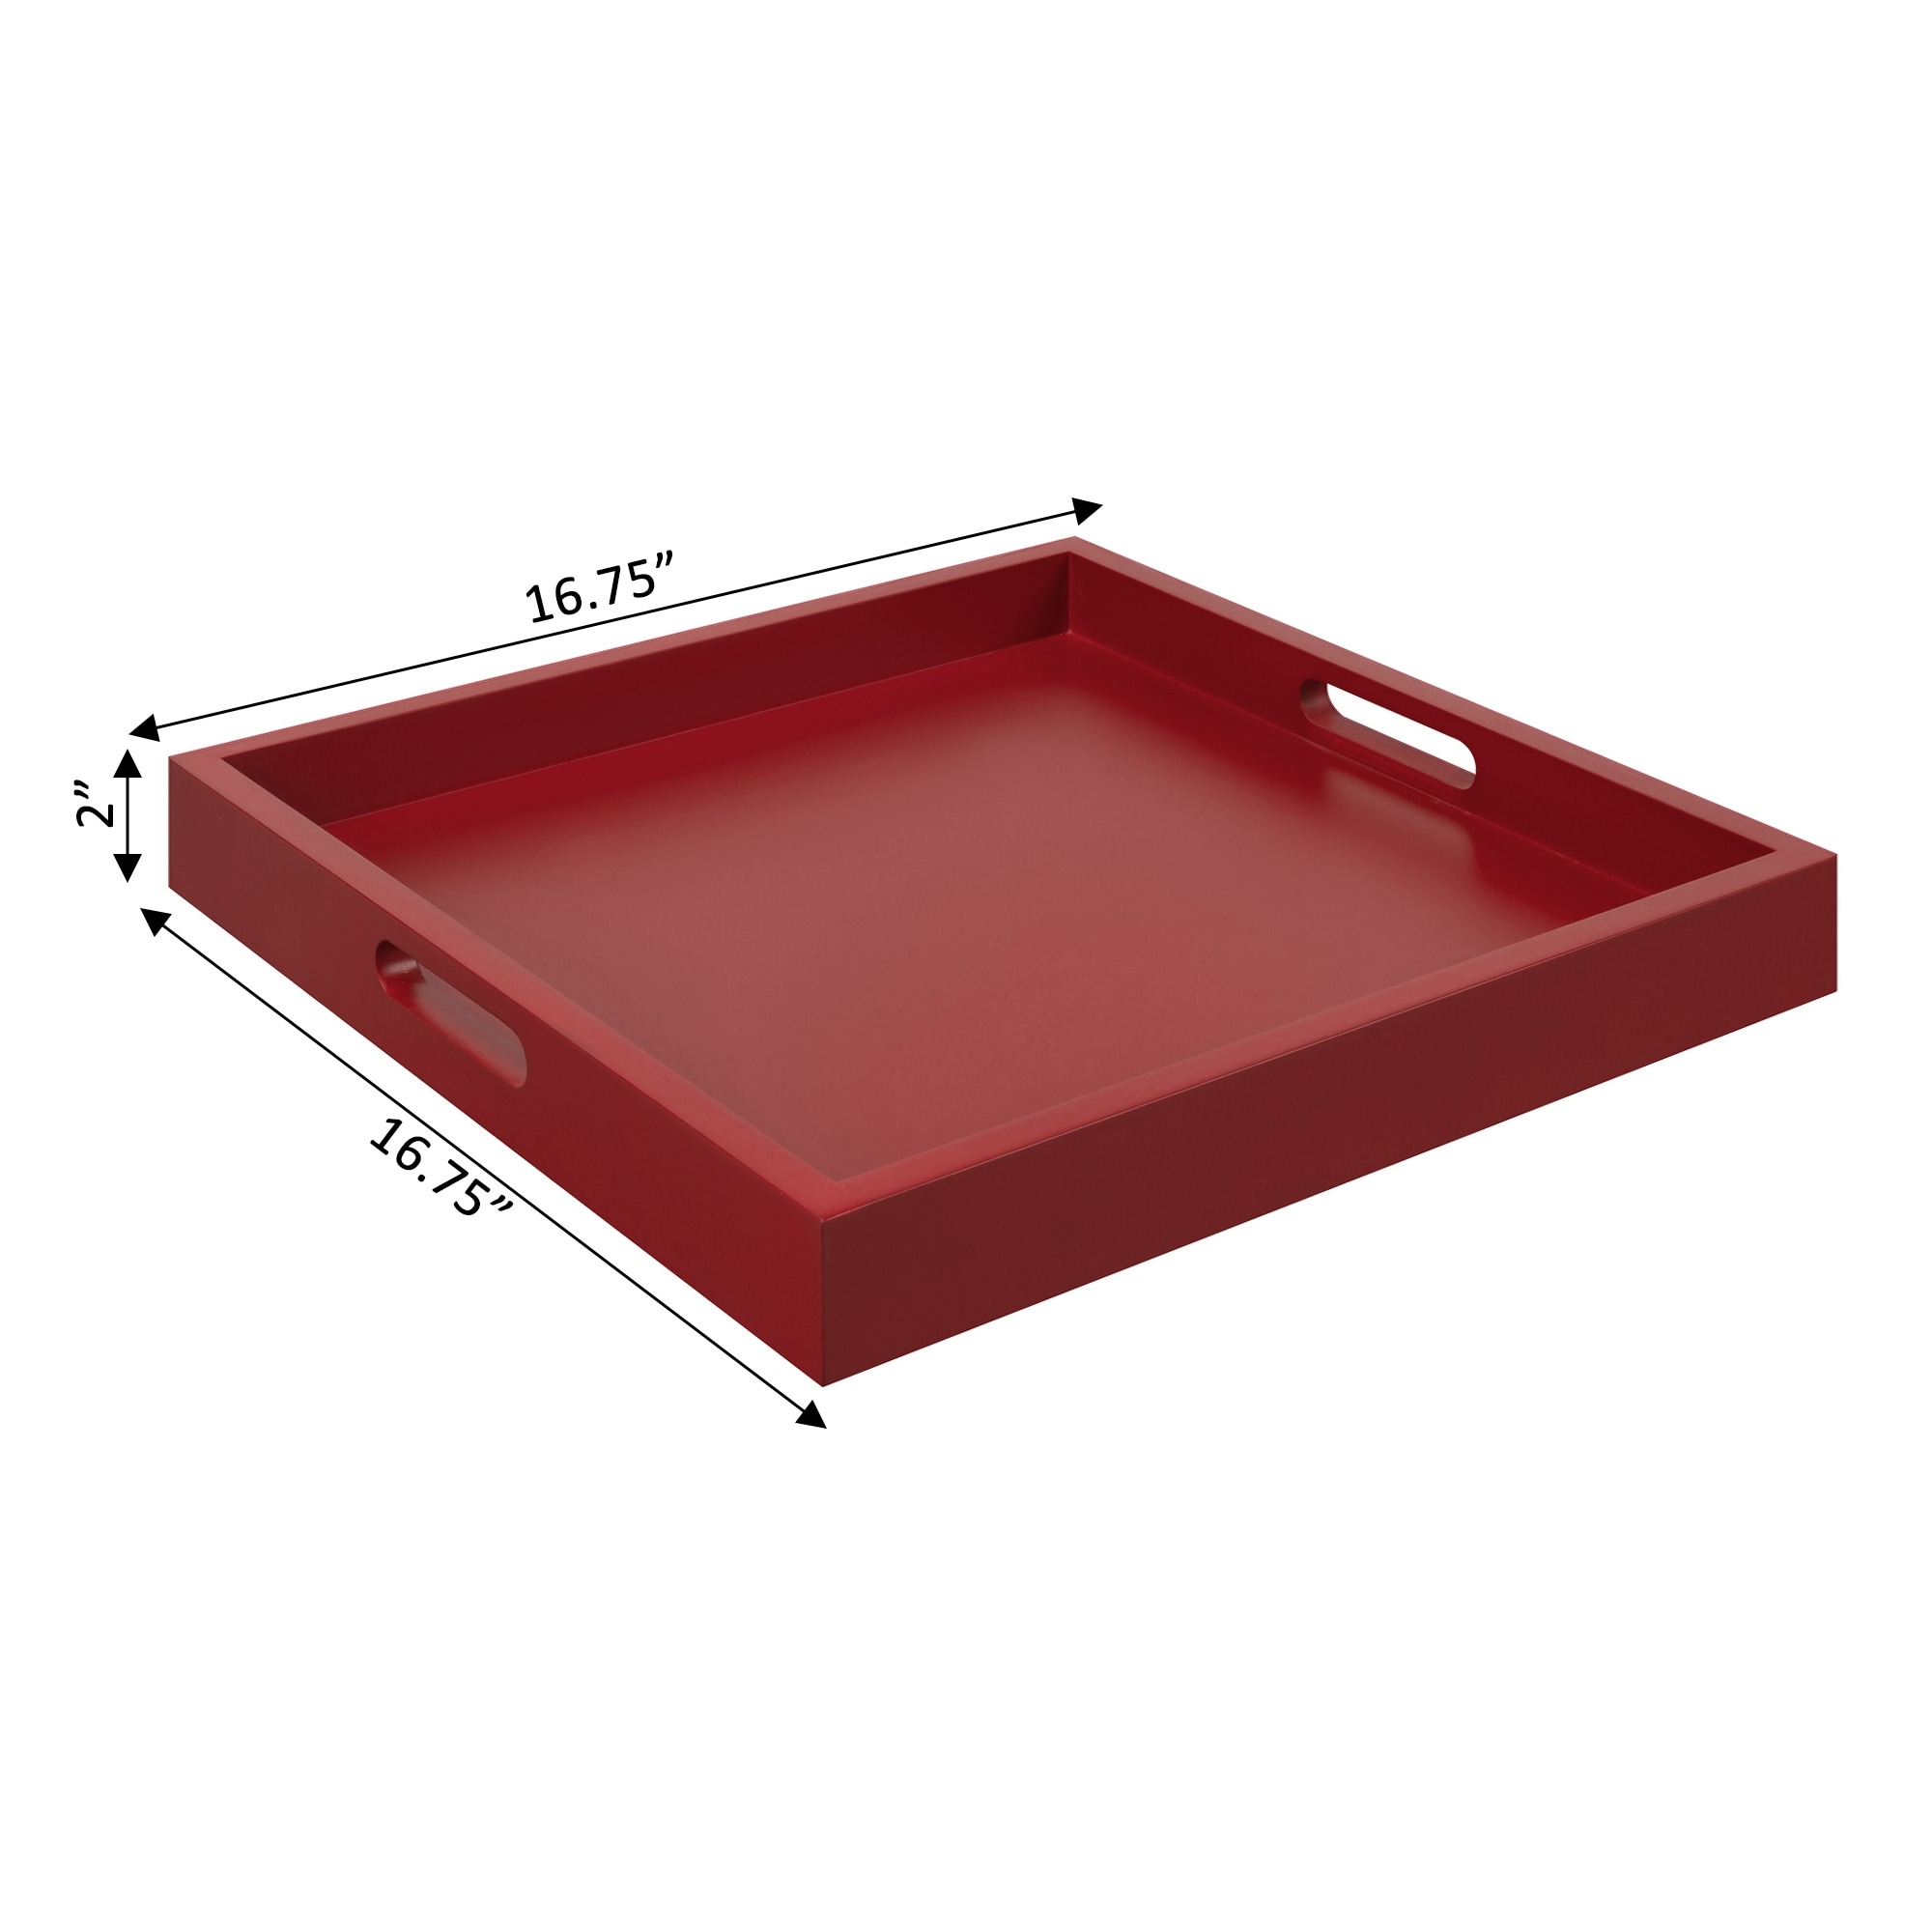 Convenience Concepts Palm Beach Tray On Sale Bed Bath  Beyond  23122651